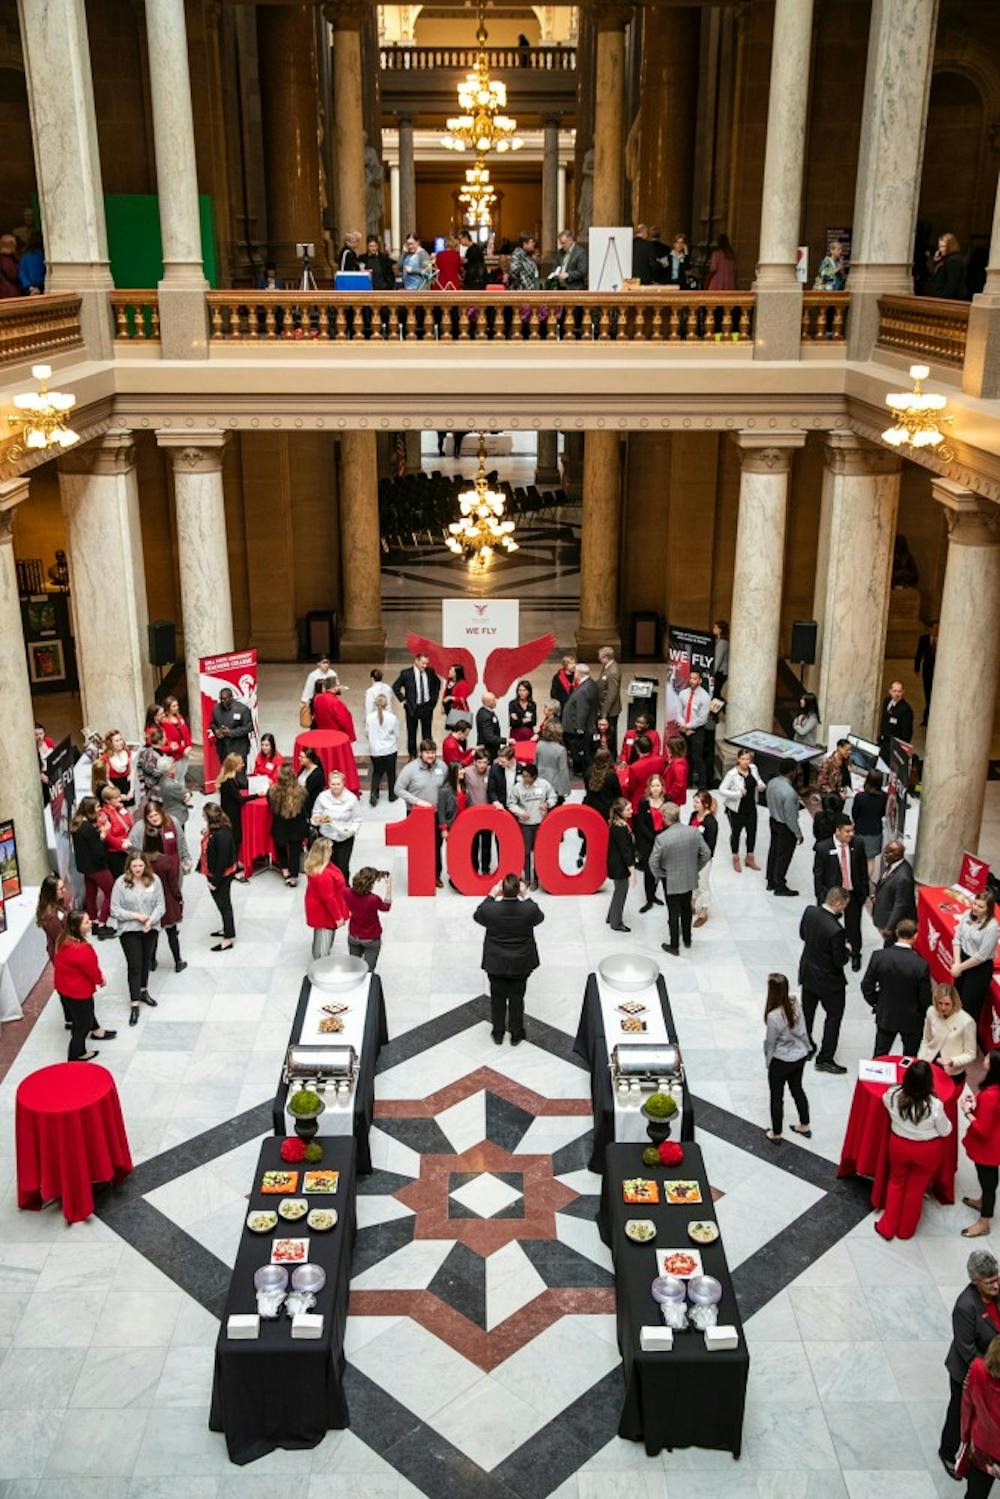 <p>Ball State faculty and students attended Ball State's annual at the statehouse. Lunch was served and representatives from the school informed state lawmakers about what is being done with the budget allotted to them by the state. <strong>Bobby Ellis, Photo Provided</strong></p>